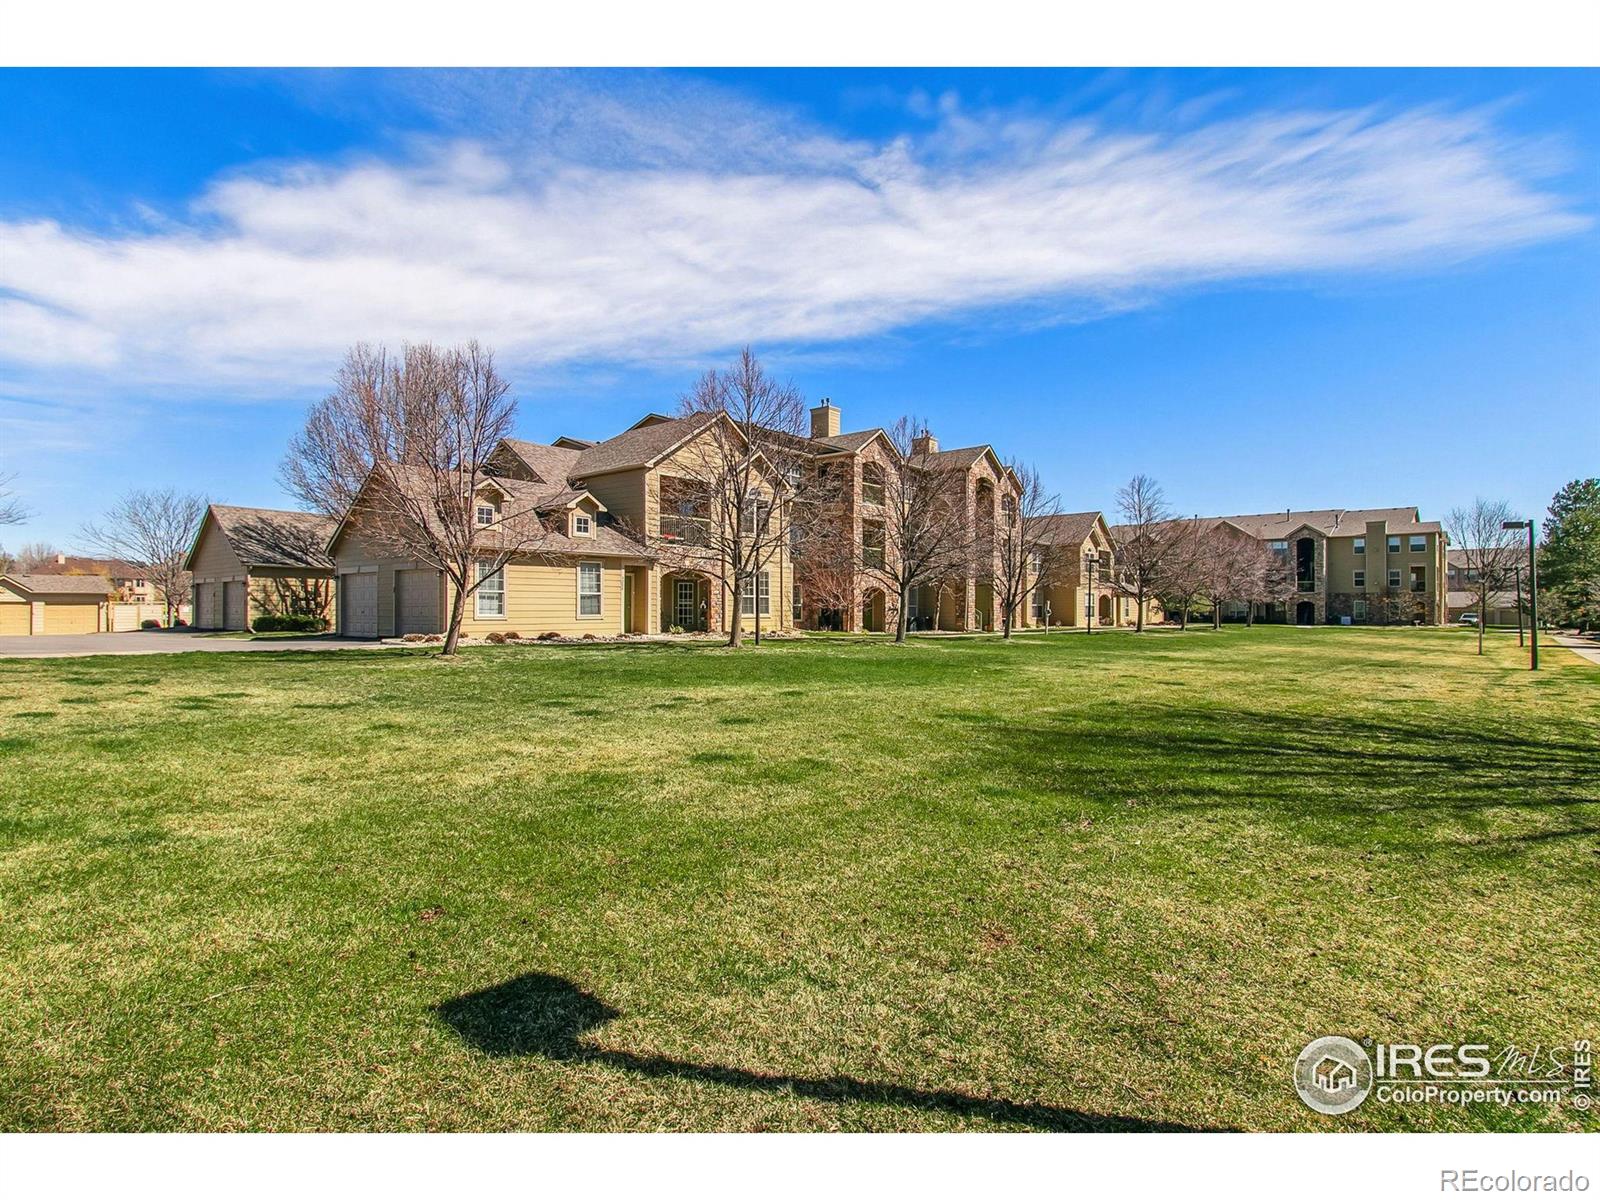 Report Image for 5620  Fossil Creek Parkway,Fort Collins, Colorado